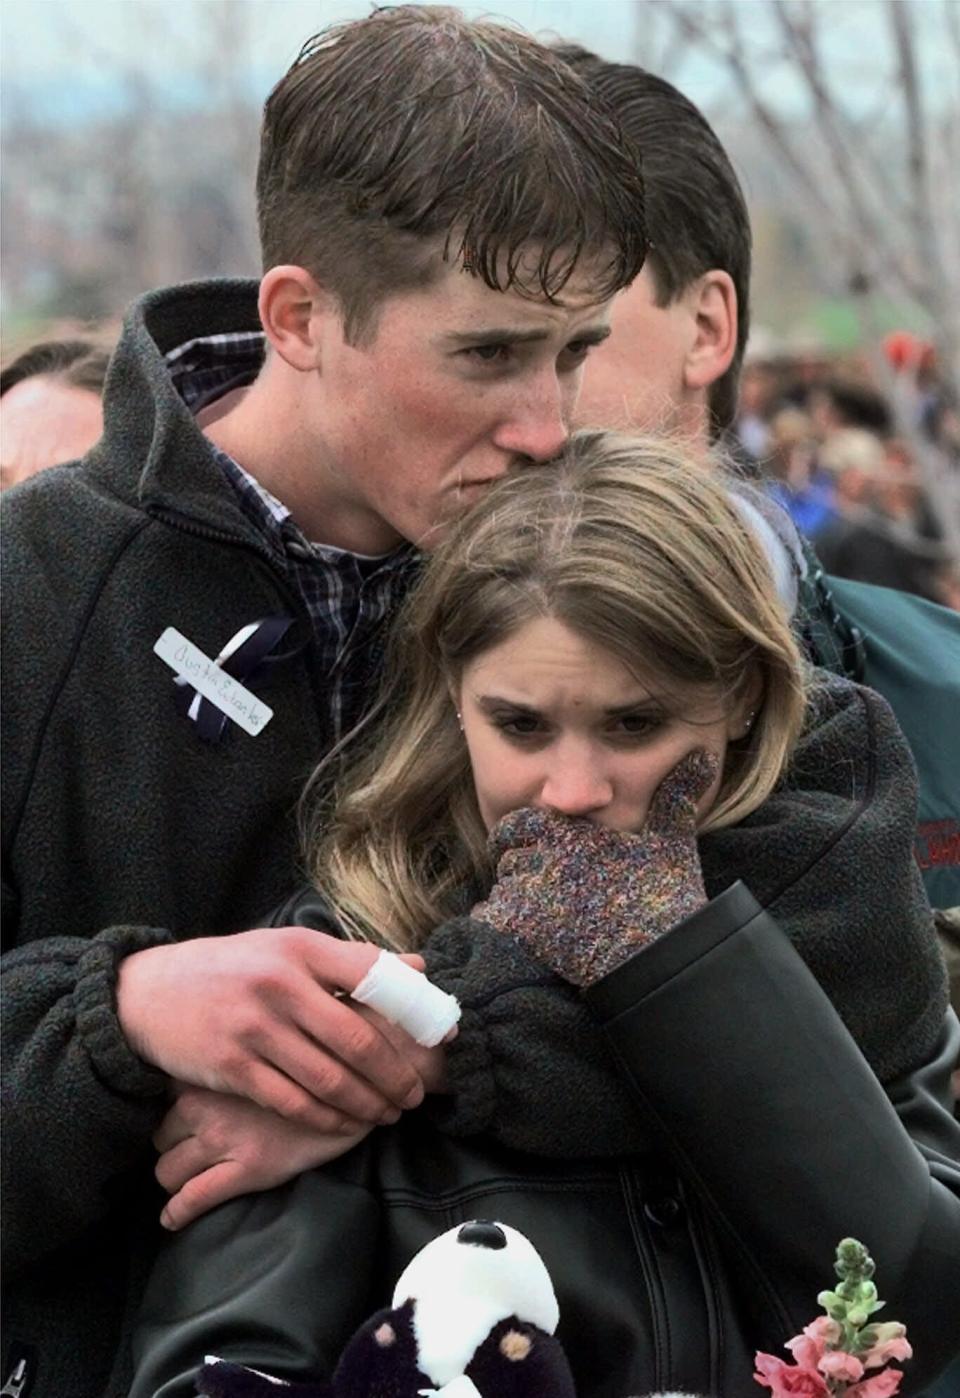 In this April 25, 1999 photo, Columbine High School shooting victim Austin Eubanks hugs his girlfriend during a memorial service in Littleton, Colorado. Thirteen people were killed by two gunmen, students at the school who then died by suicide. (Photo: ASSOCIATED PRESS)